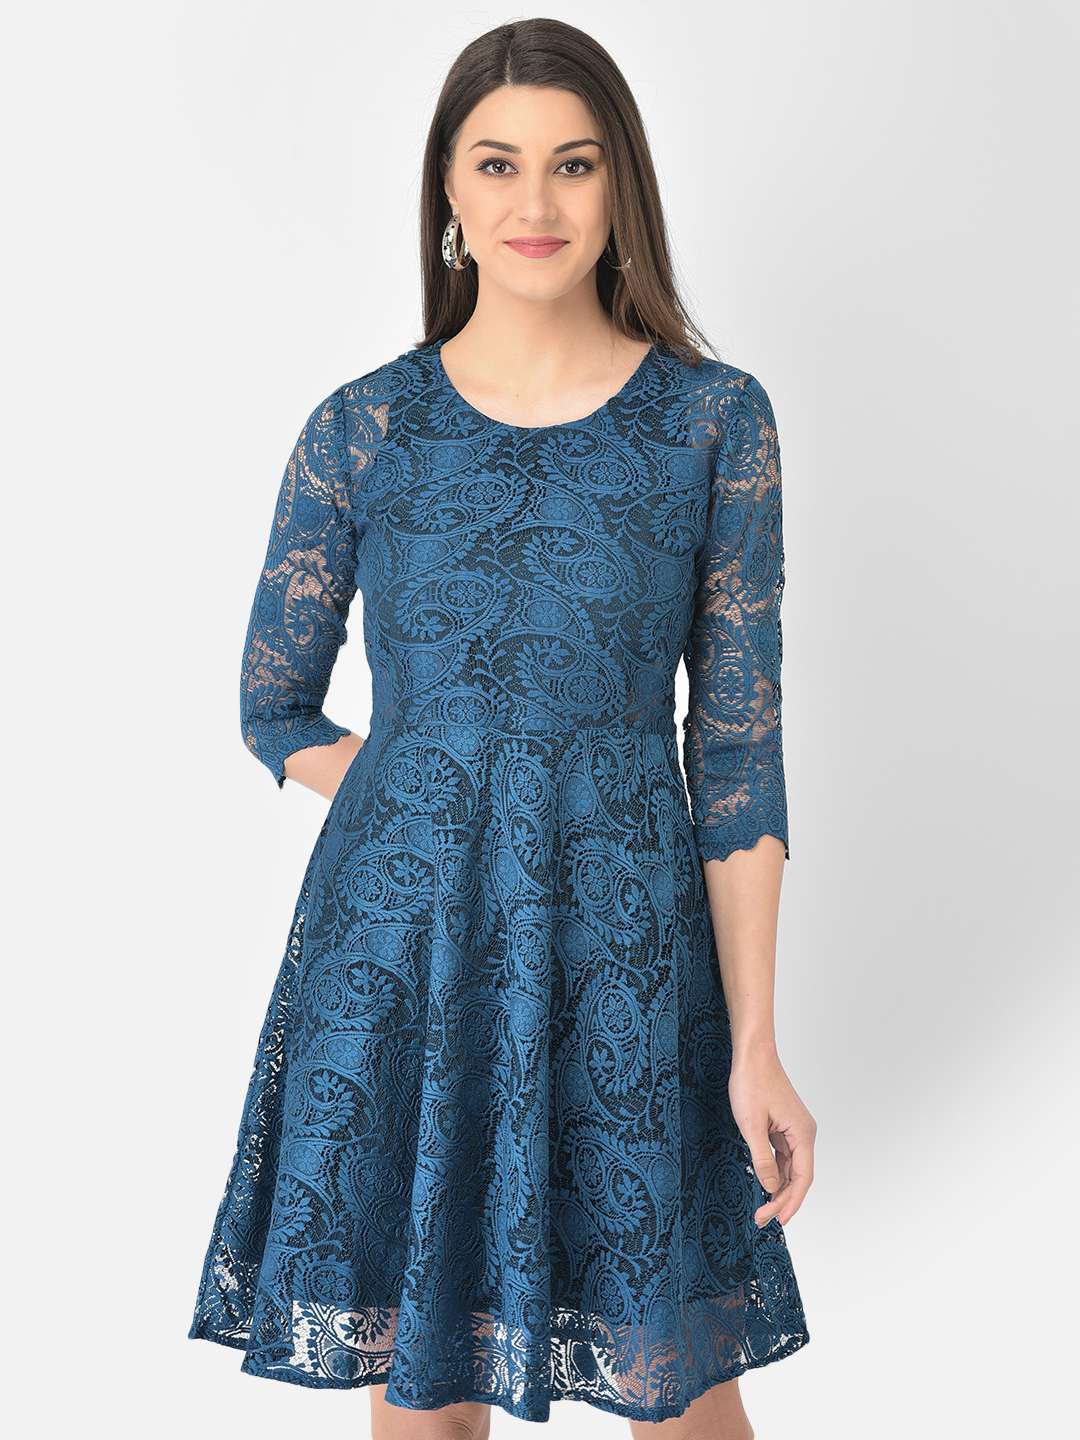 Get Lace Floral Detail Navy Round Neck Body Fit Dress at ₹ 1299 | LBB Shop